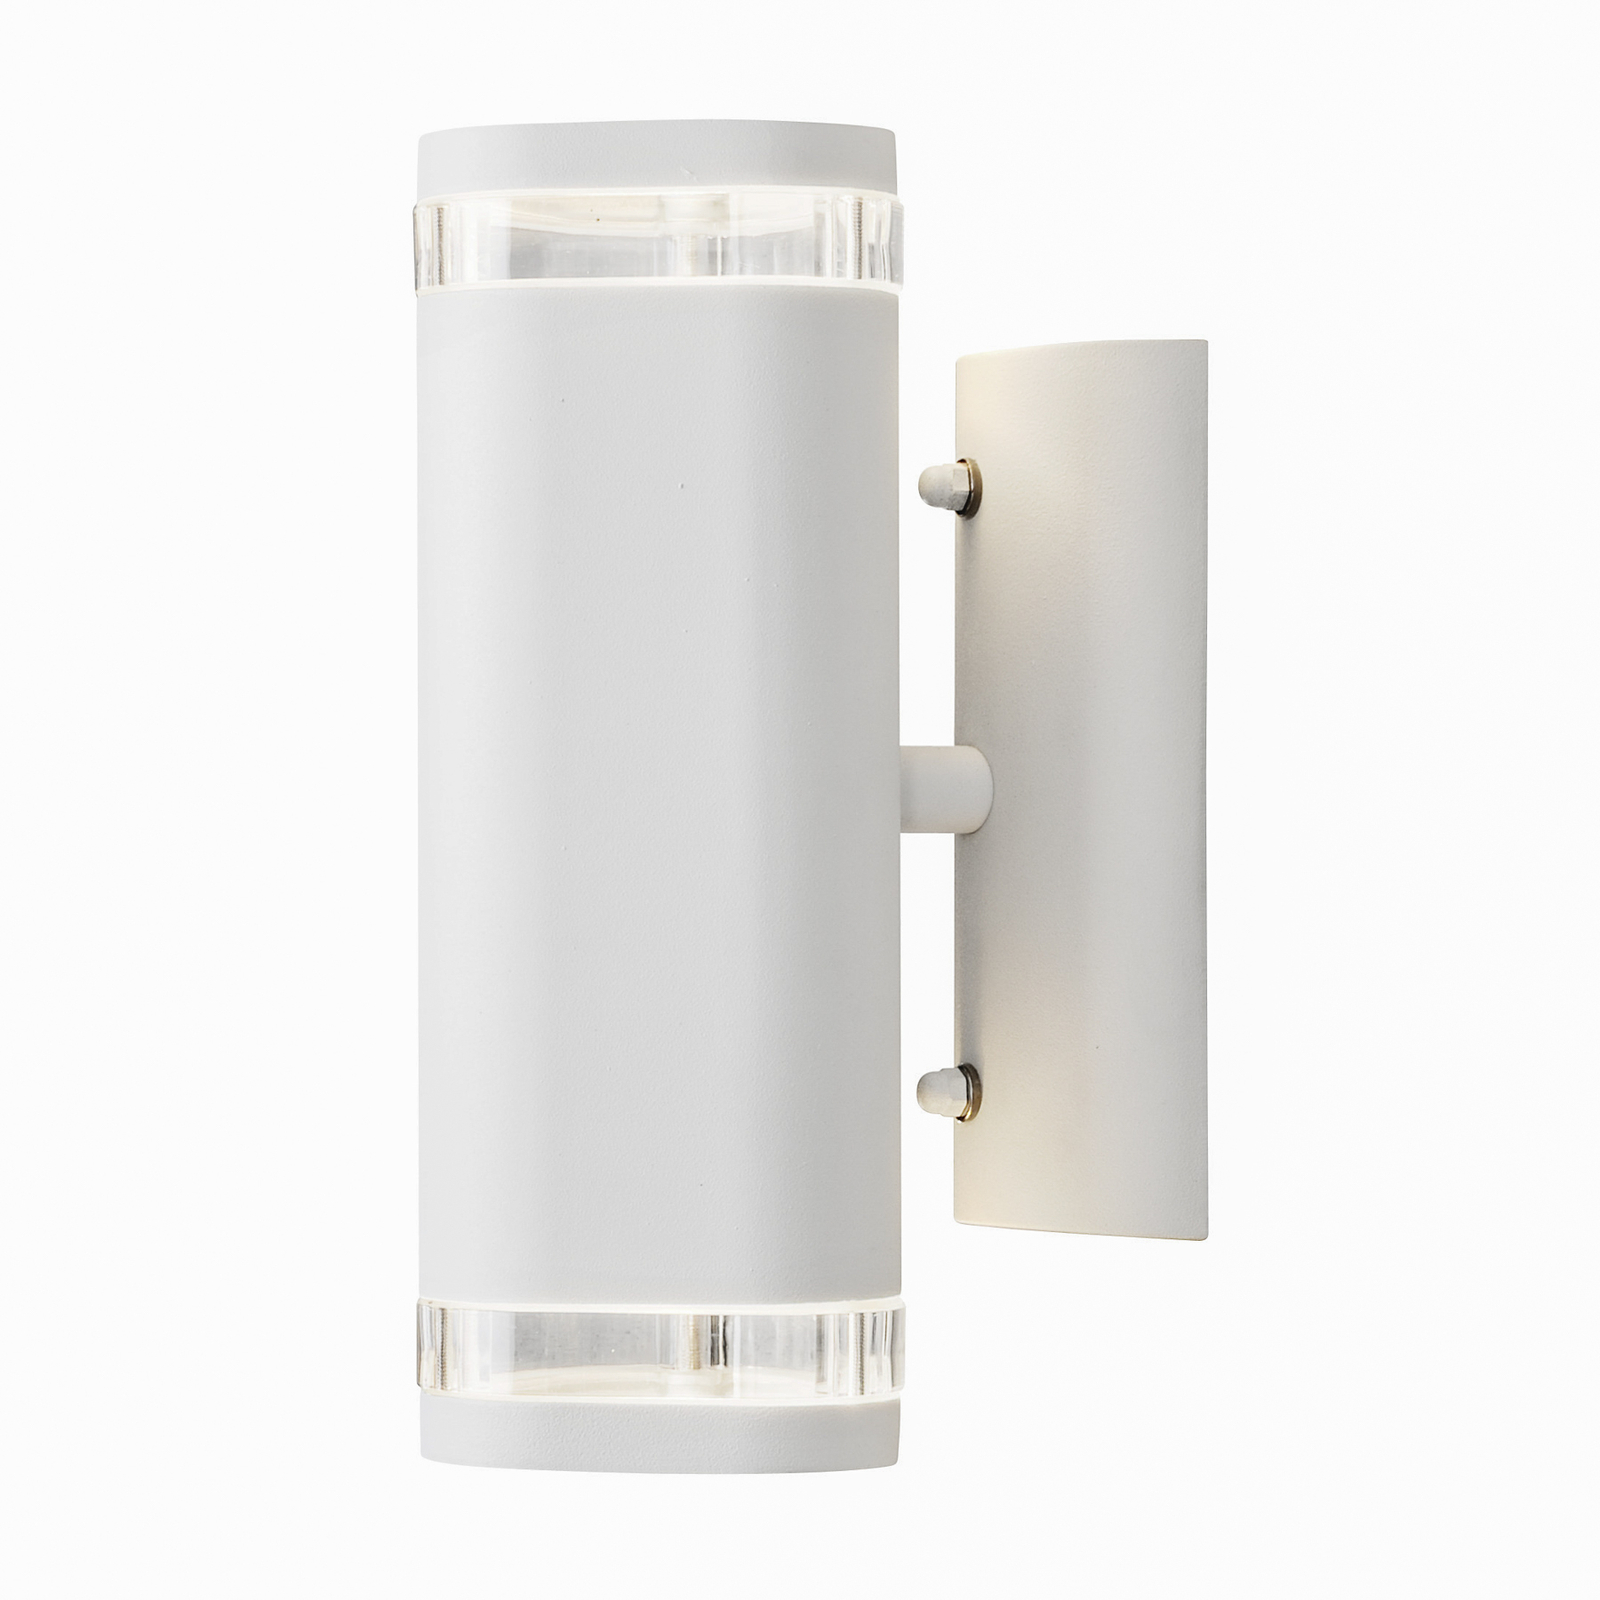 Modena outdoor wall light with slit, 2-bulb, white